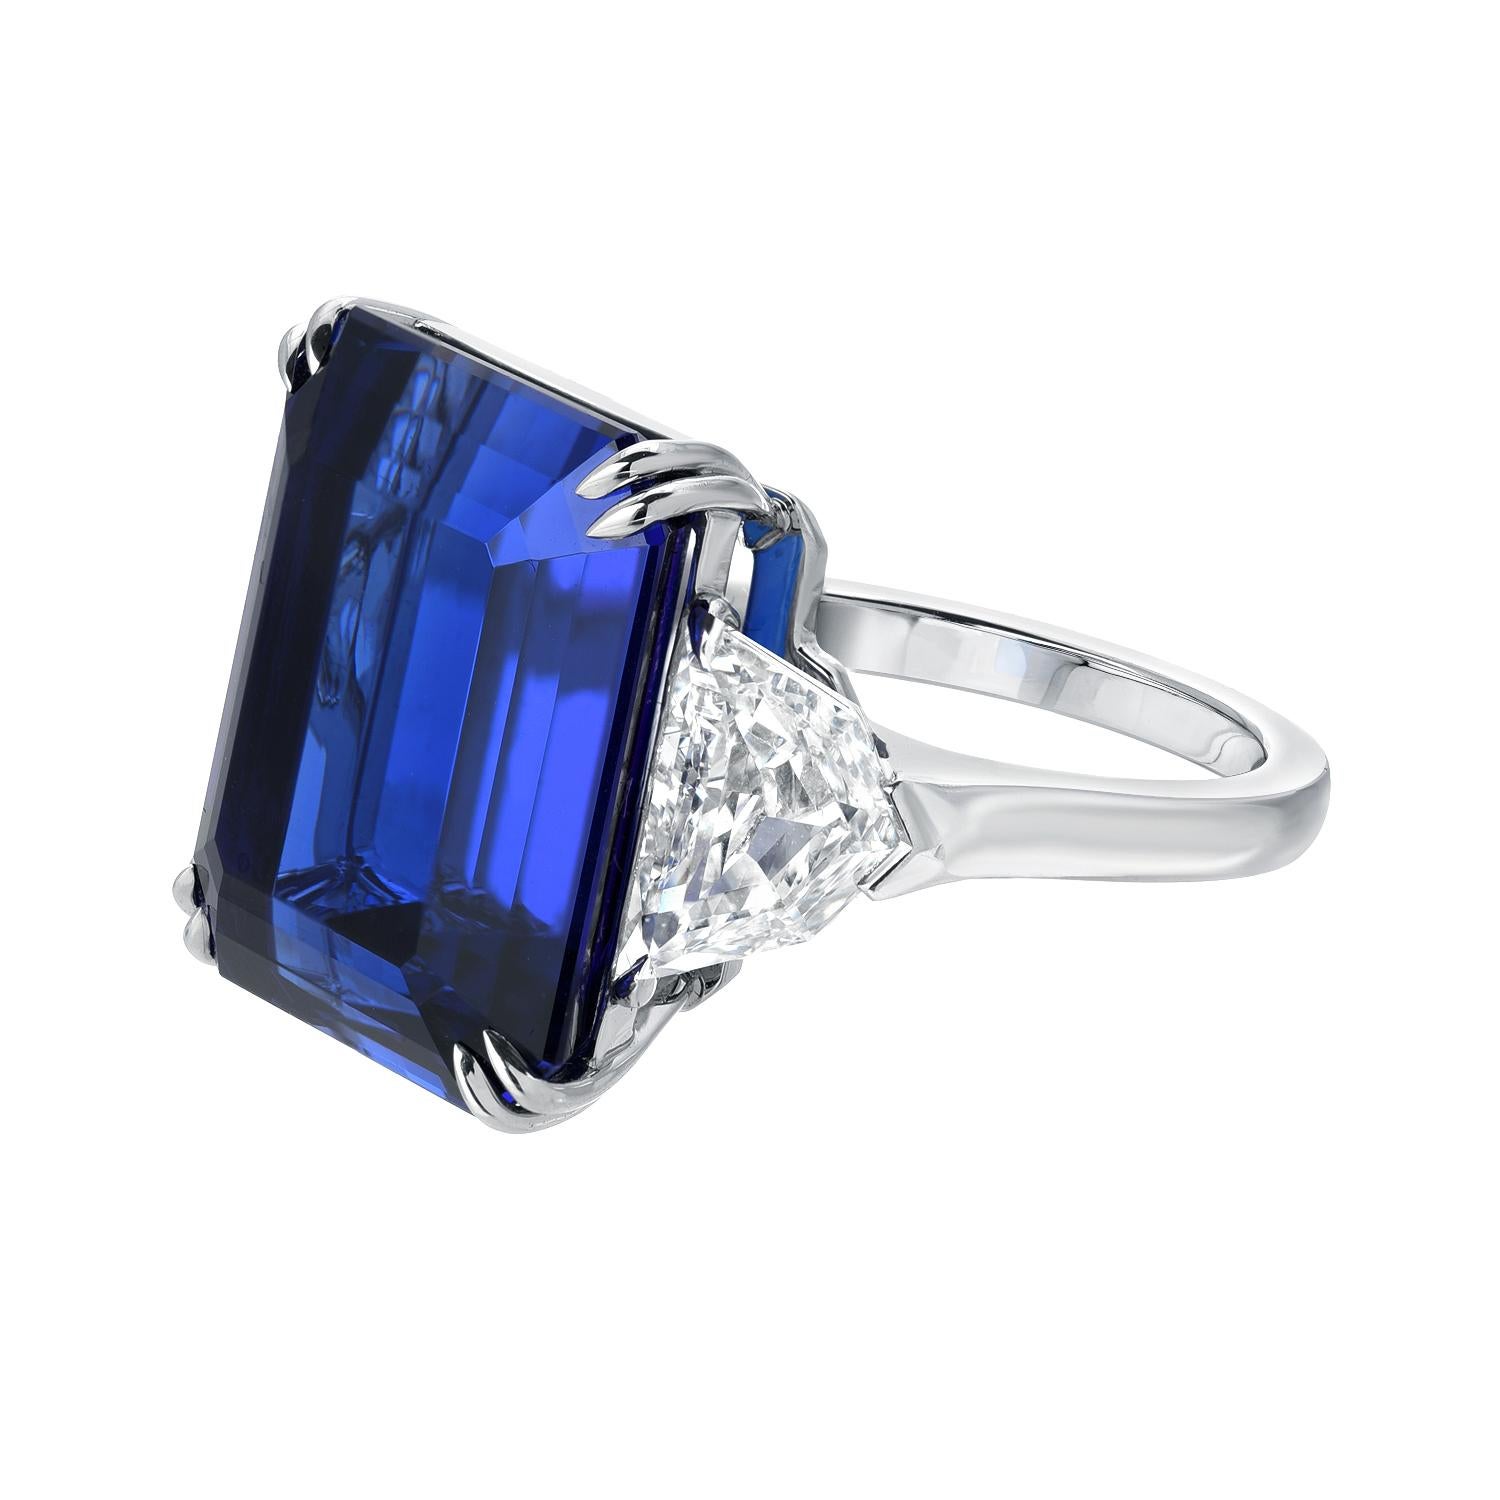 This unmatched 20.51 carat emerald cut Tanzanite, flanked by a pair of 2.04 carats total F/VS2 Diamonds, is hand set in this extraordinary hand crafted platinum ring. The combination of its rich vivid blue hue, strong saturation, complimented by its